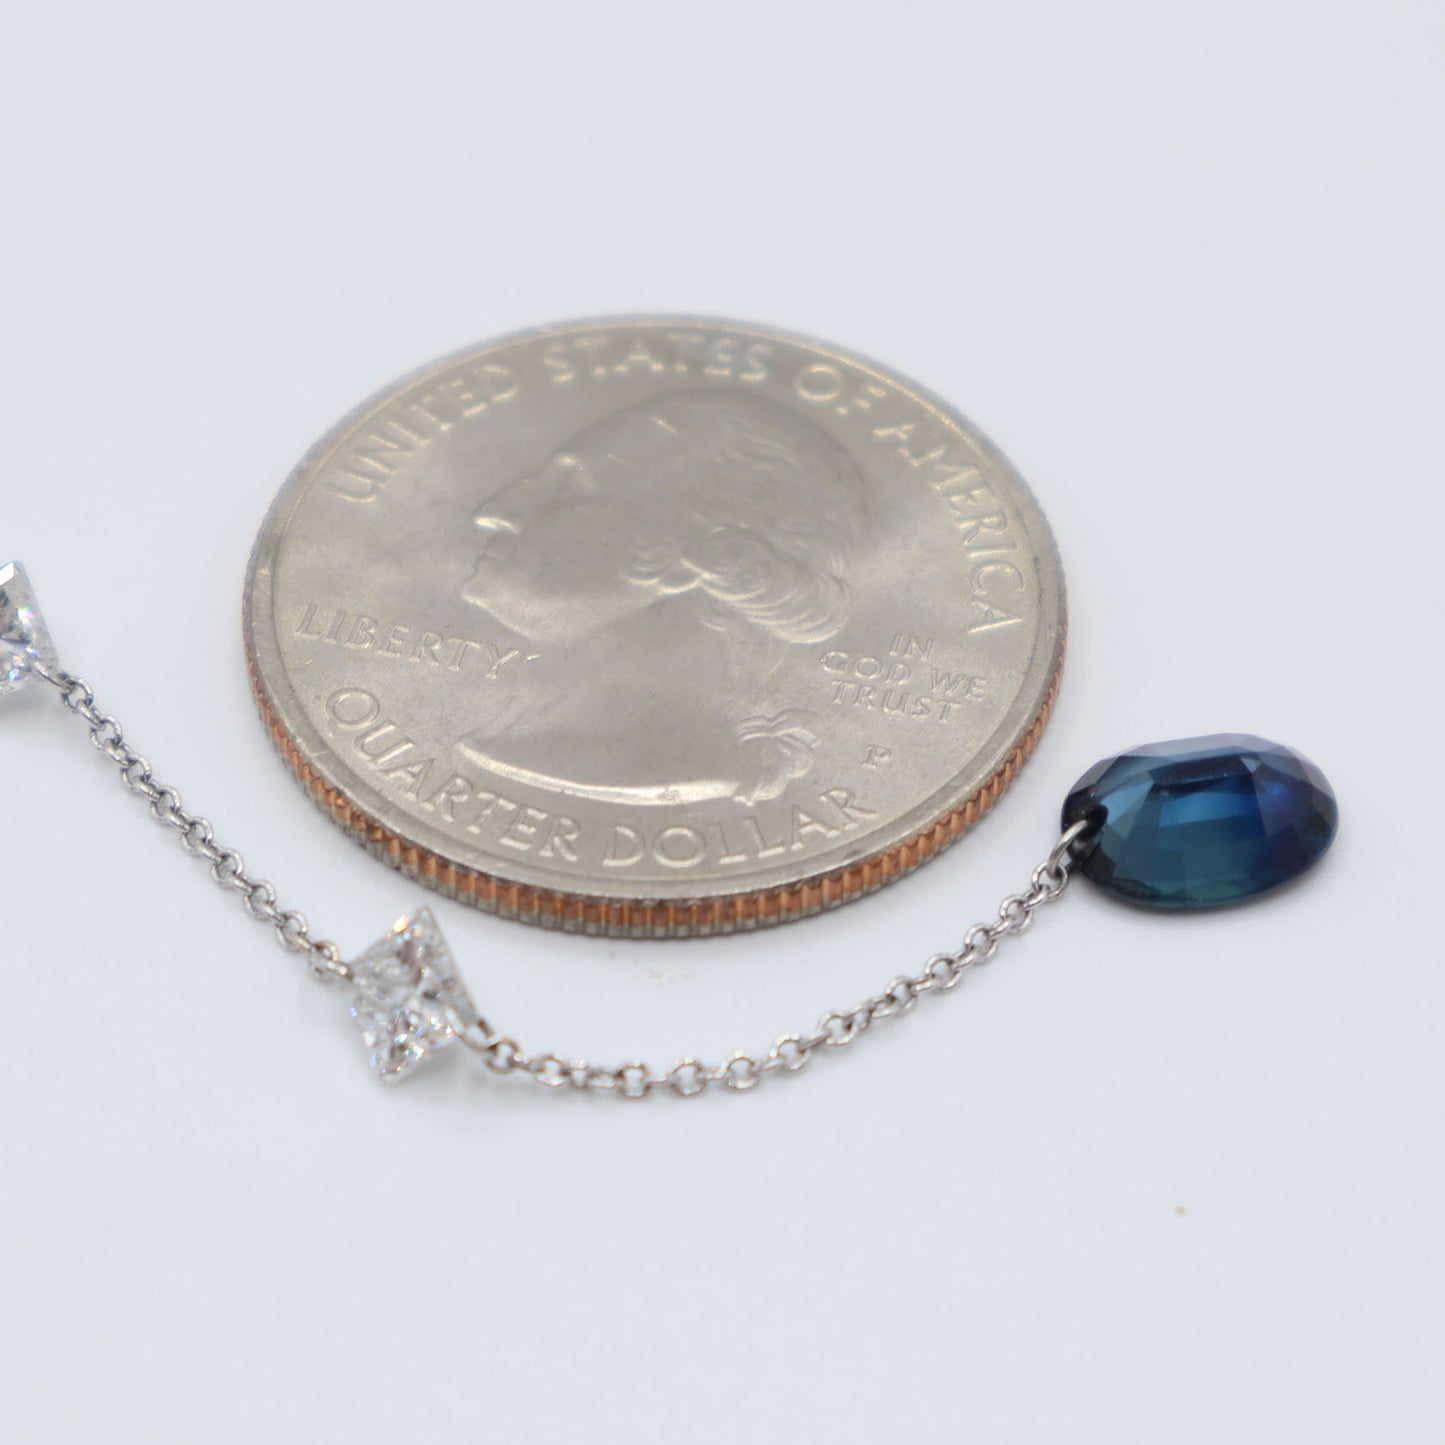 Drilled Blue Sapphire Y Pendant